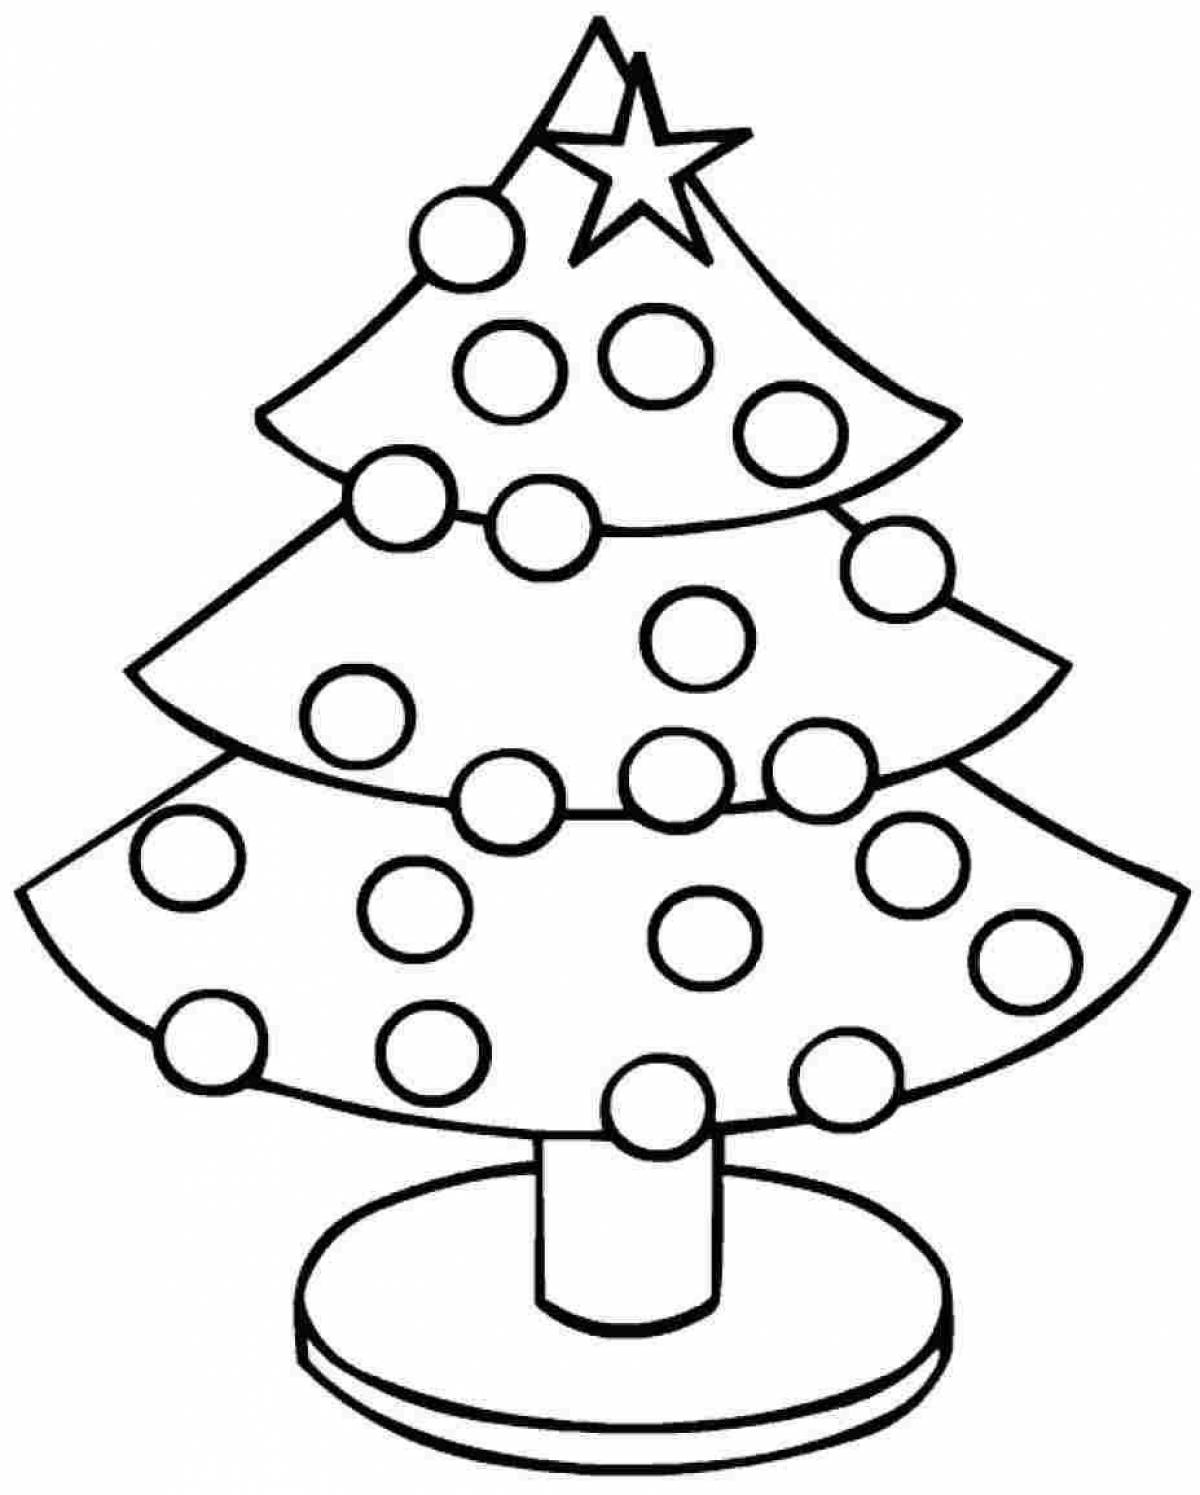 Cute Christmas tree coloring page for preschoolers 2-3 years old